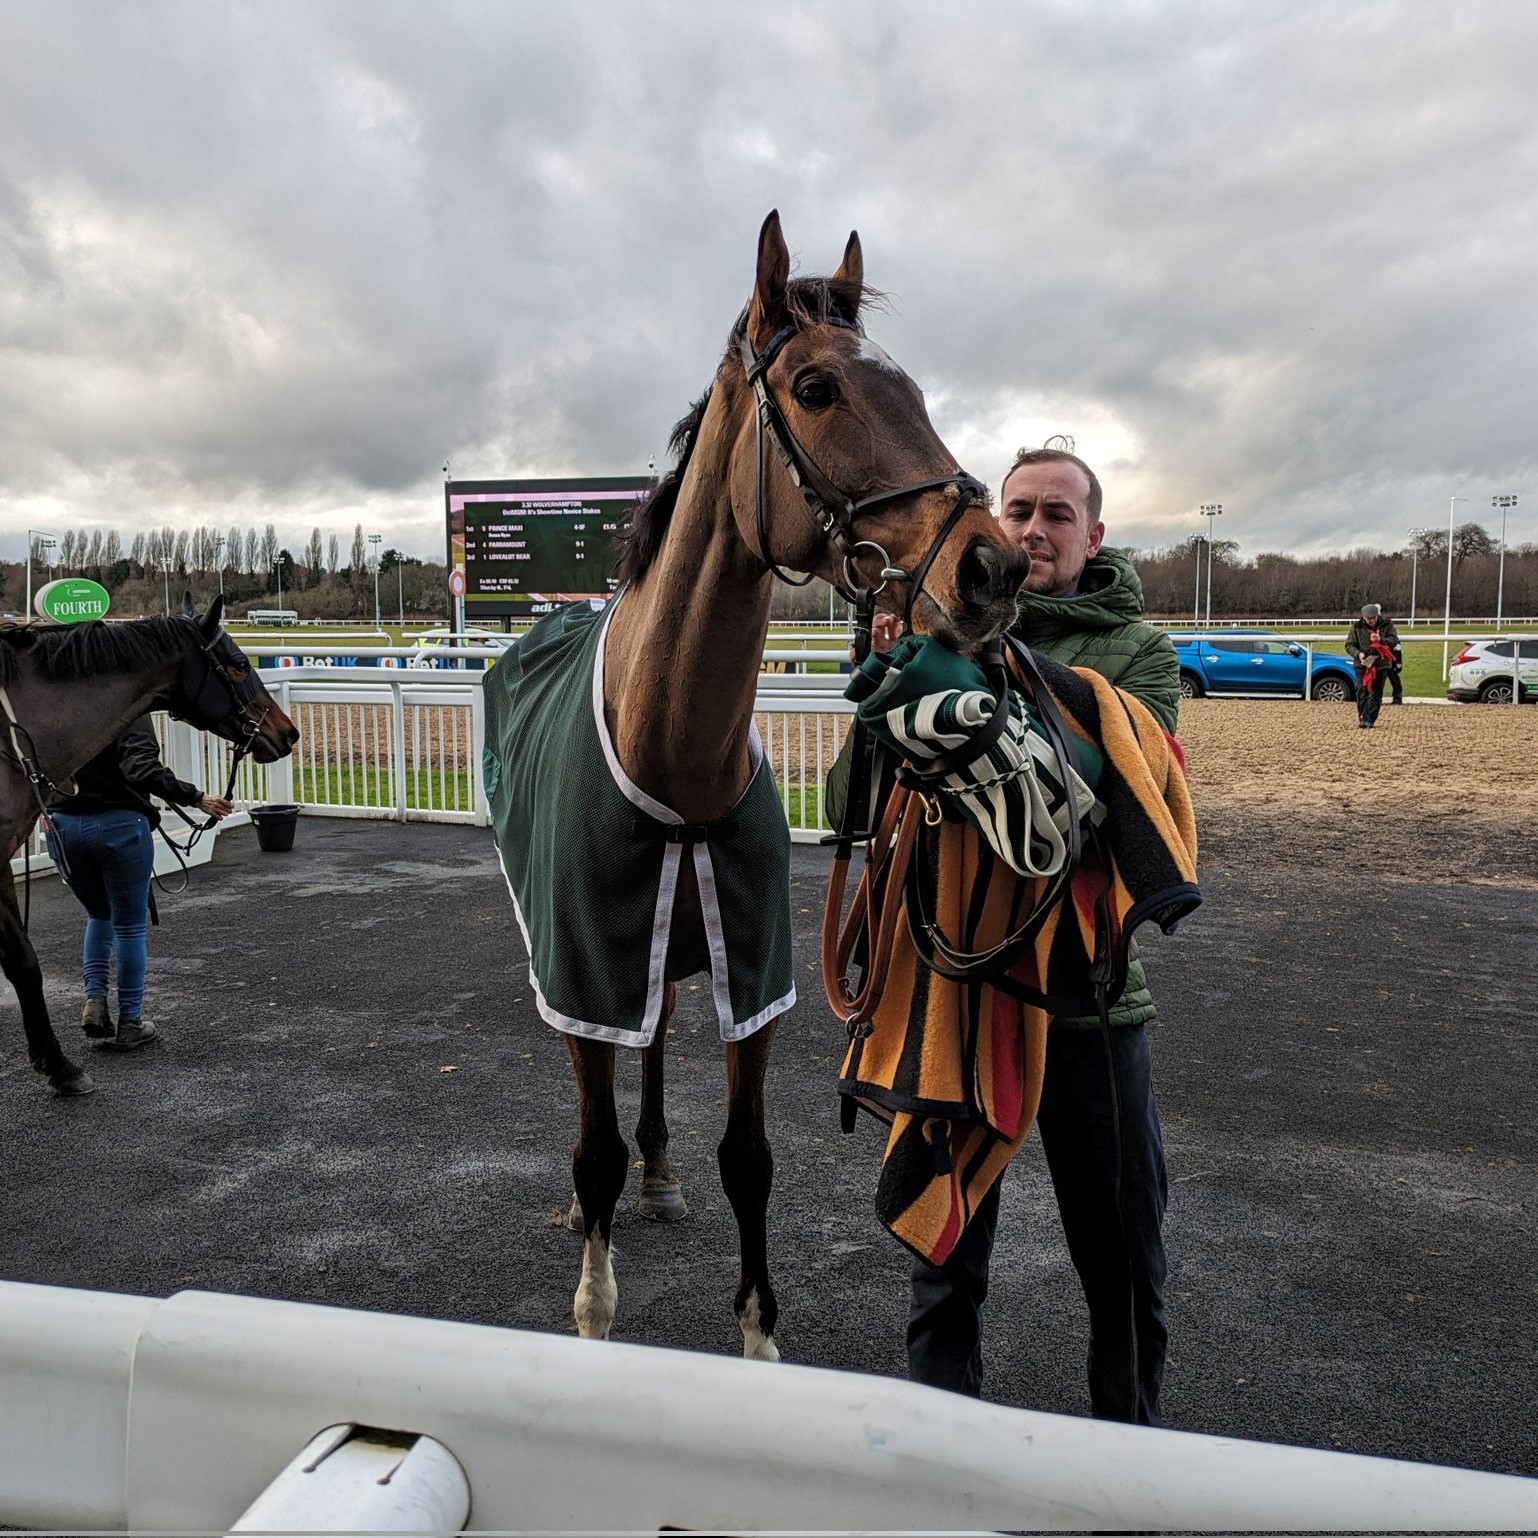 Parramount lands 2nd in his Flat Debut